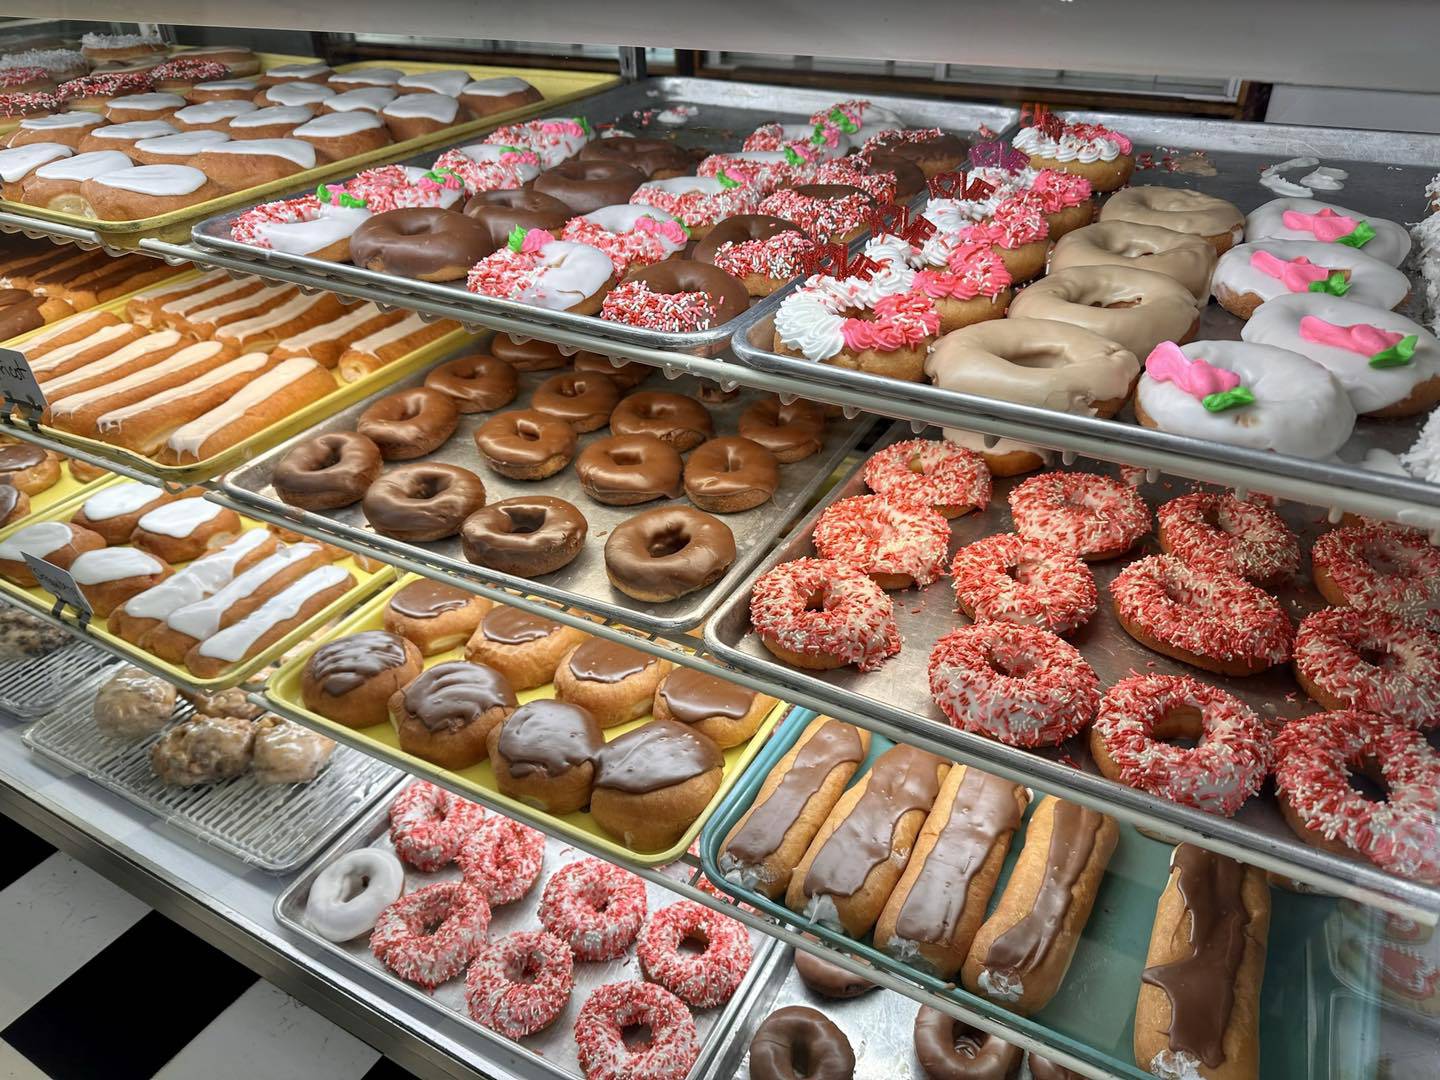 Steve's Bakery has locations in Ottawa and Streator.